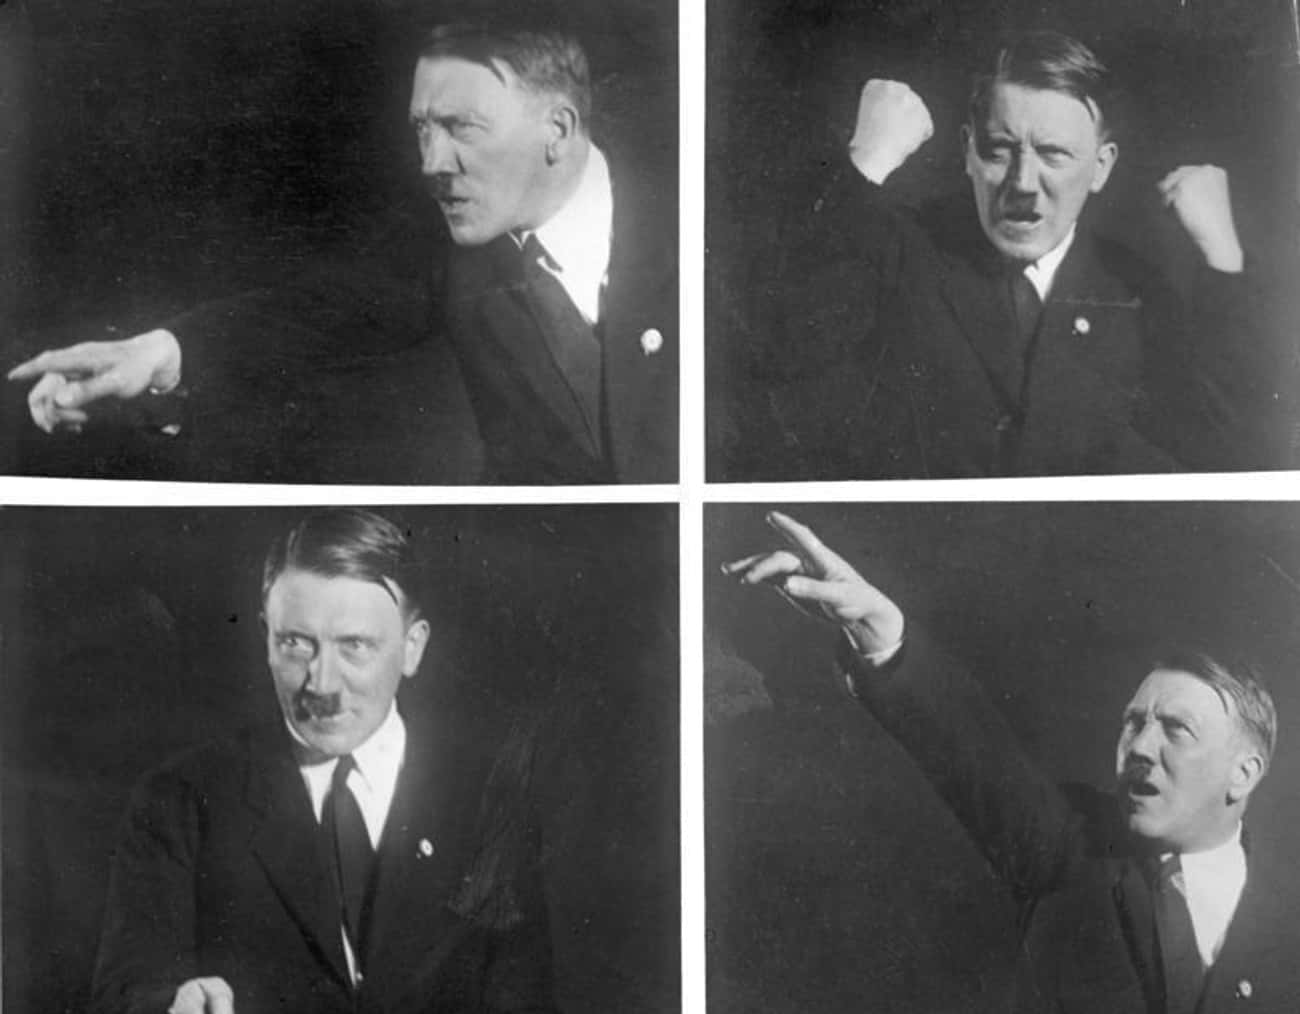 After He Had His Cyanide Capsules Tested On Blondi, Hitler Was Deeply Bereaved